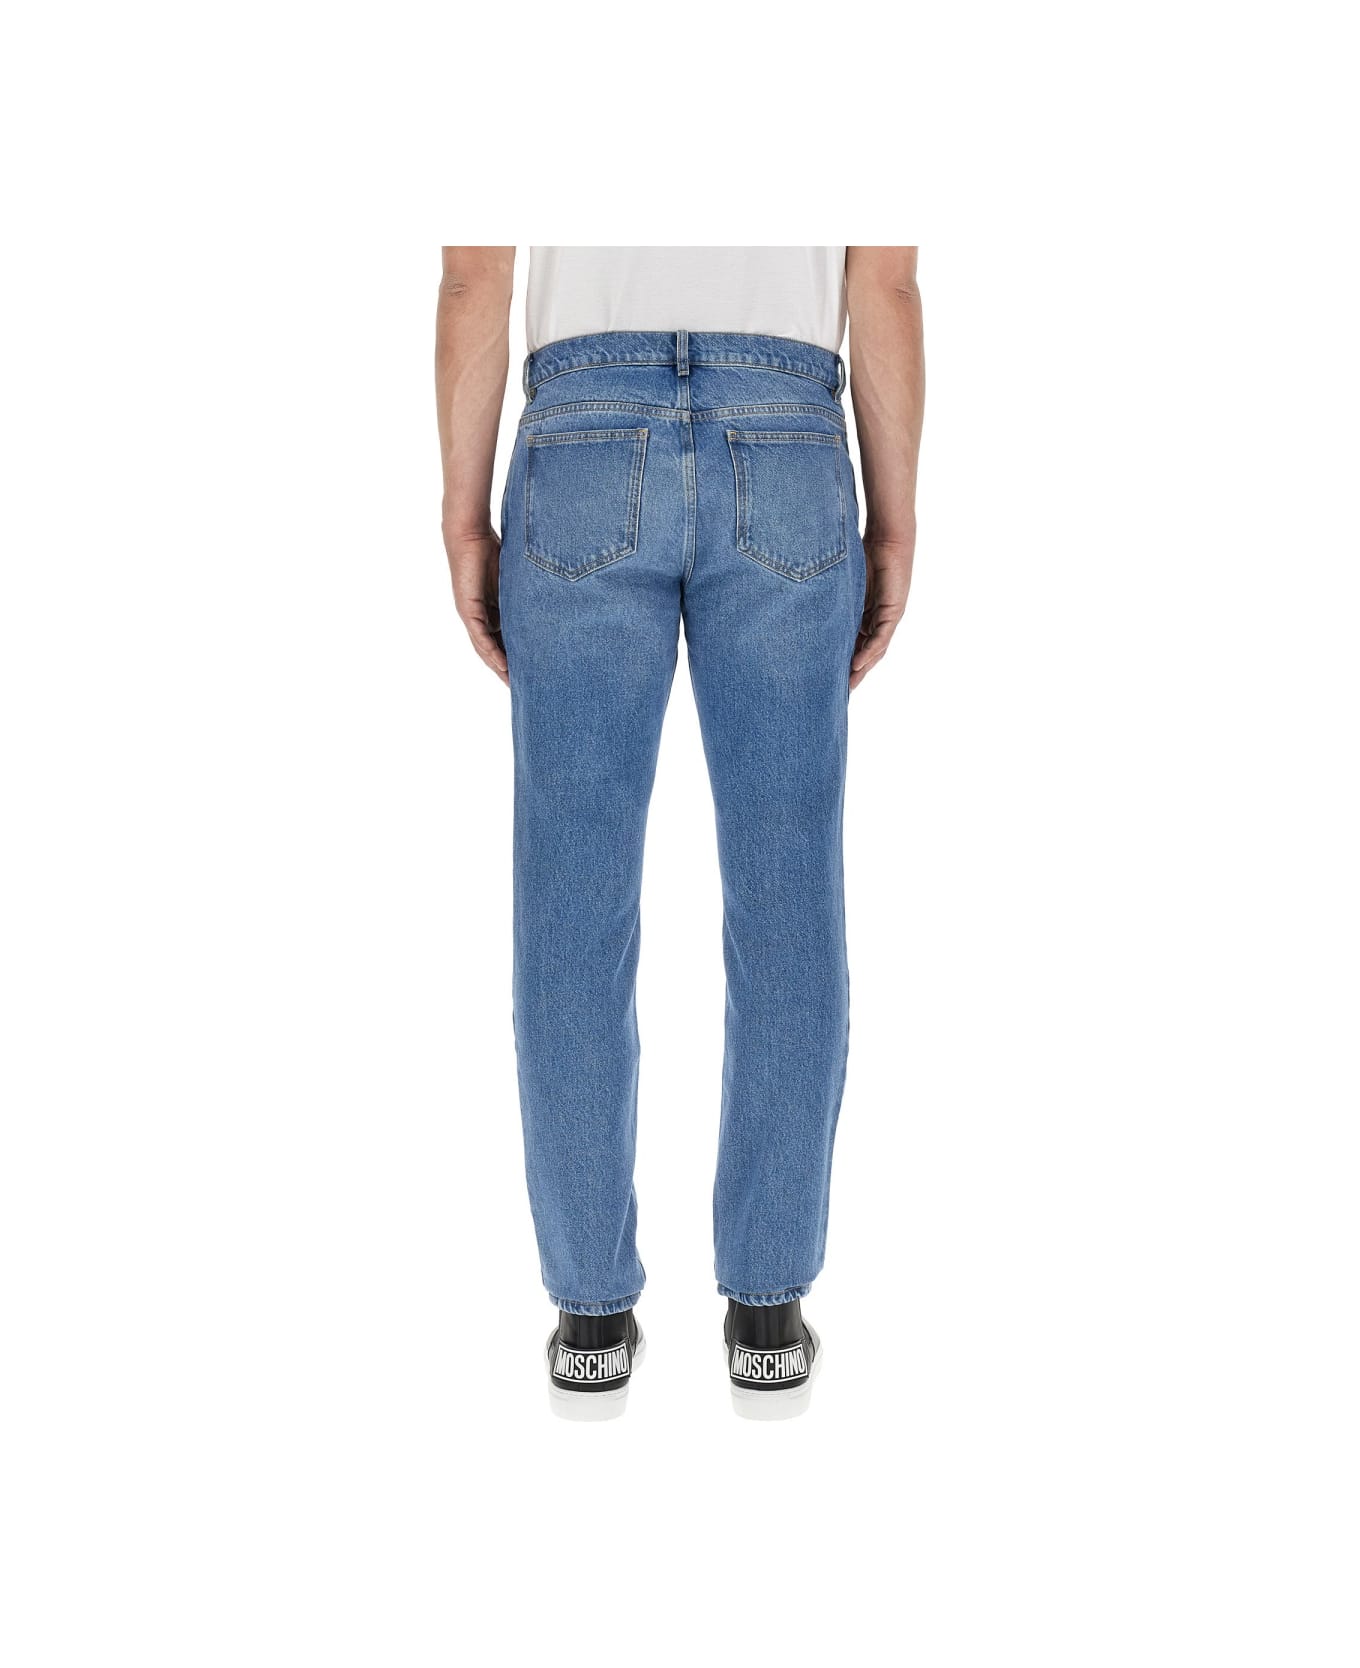 Moschino Teddy Patch Jeans - BLUE デニム